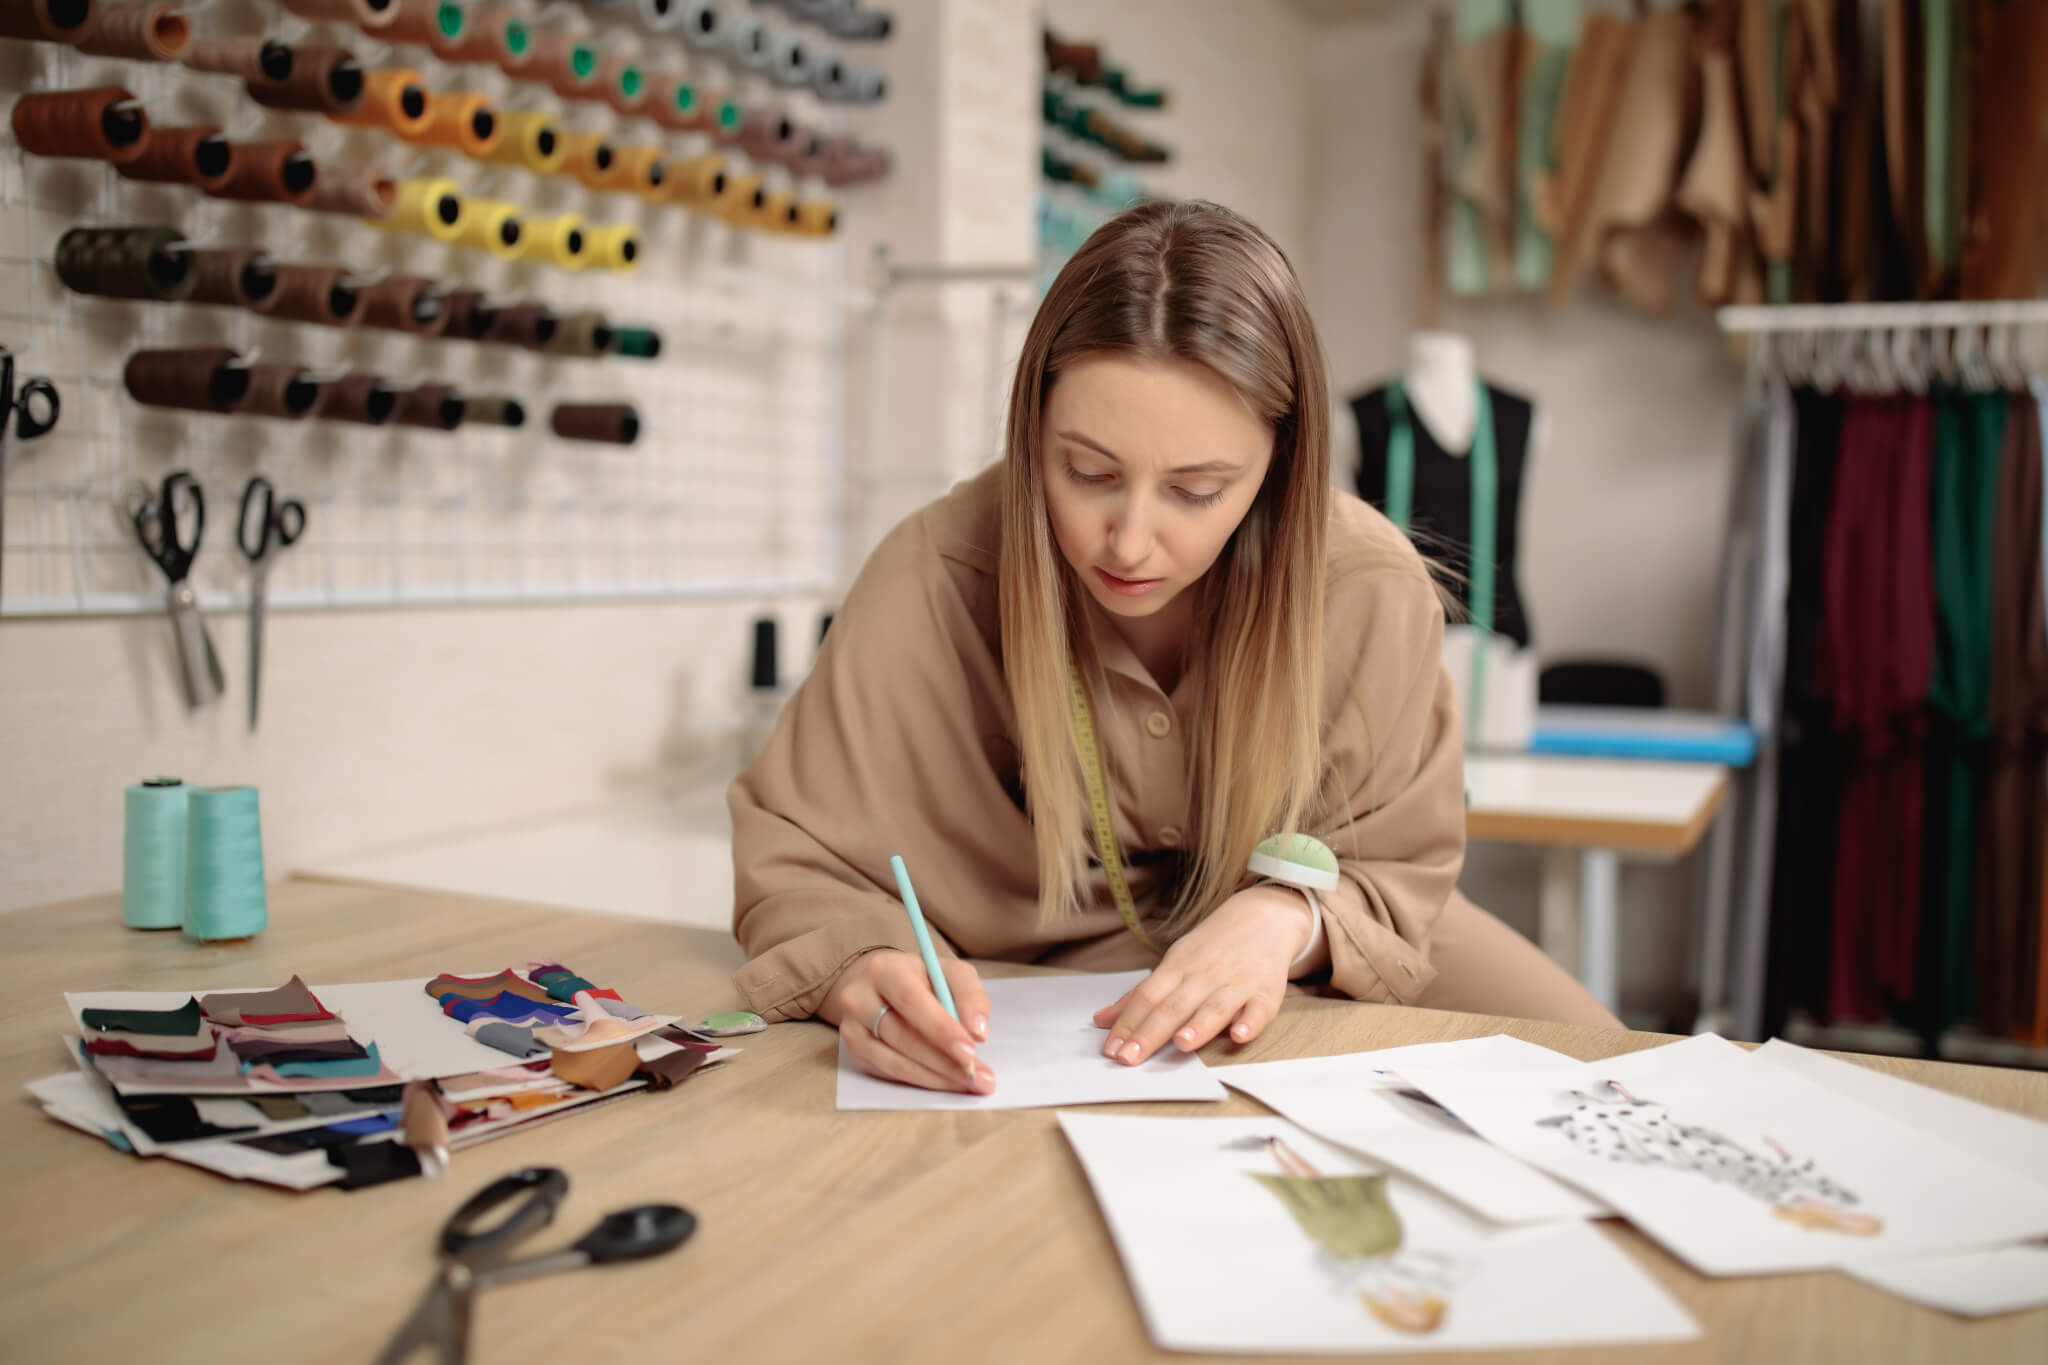 woman fashion designer draws sketches. attractive young female dressmaker sketching in studio